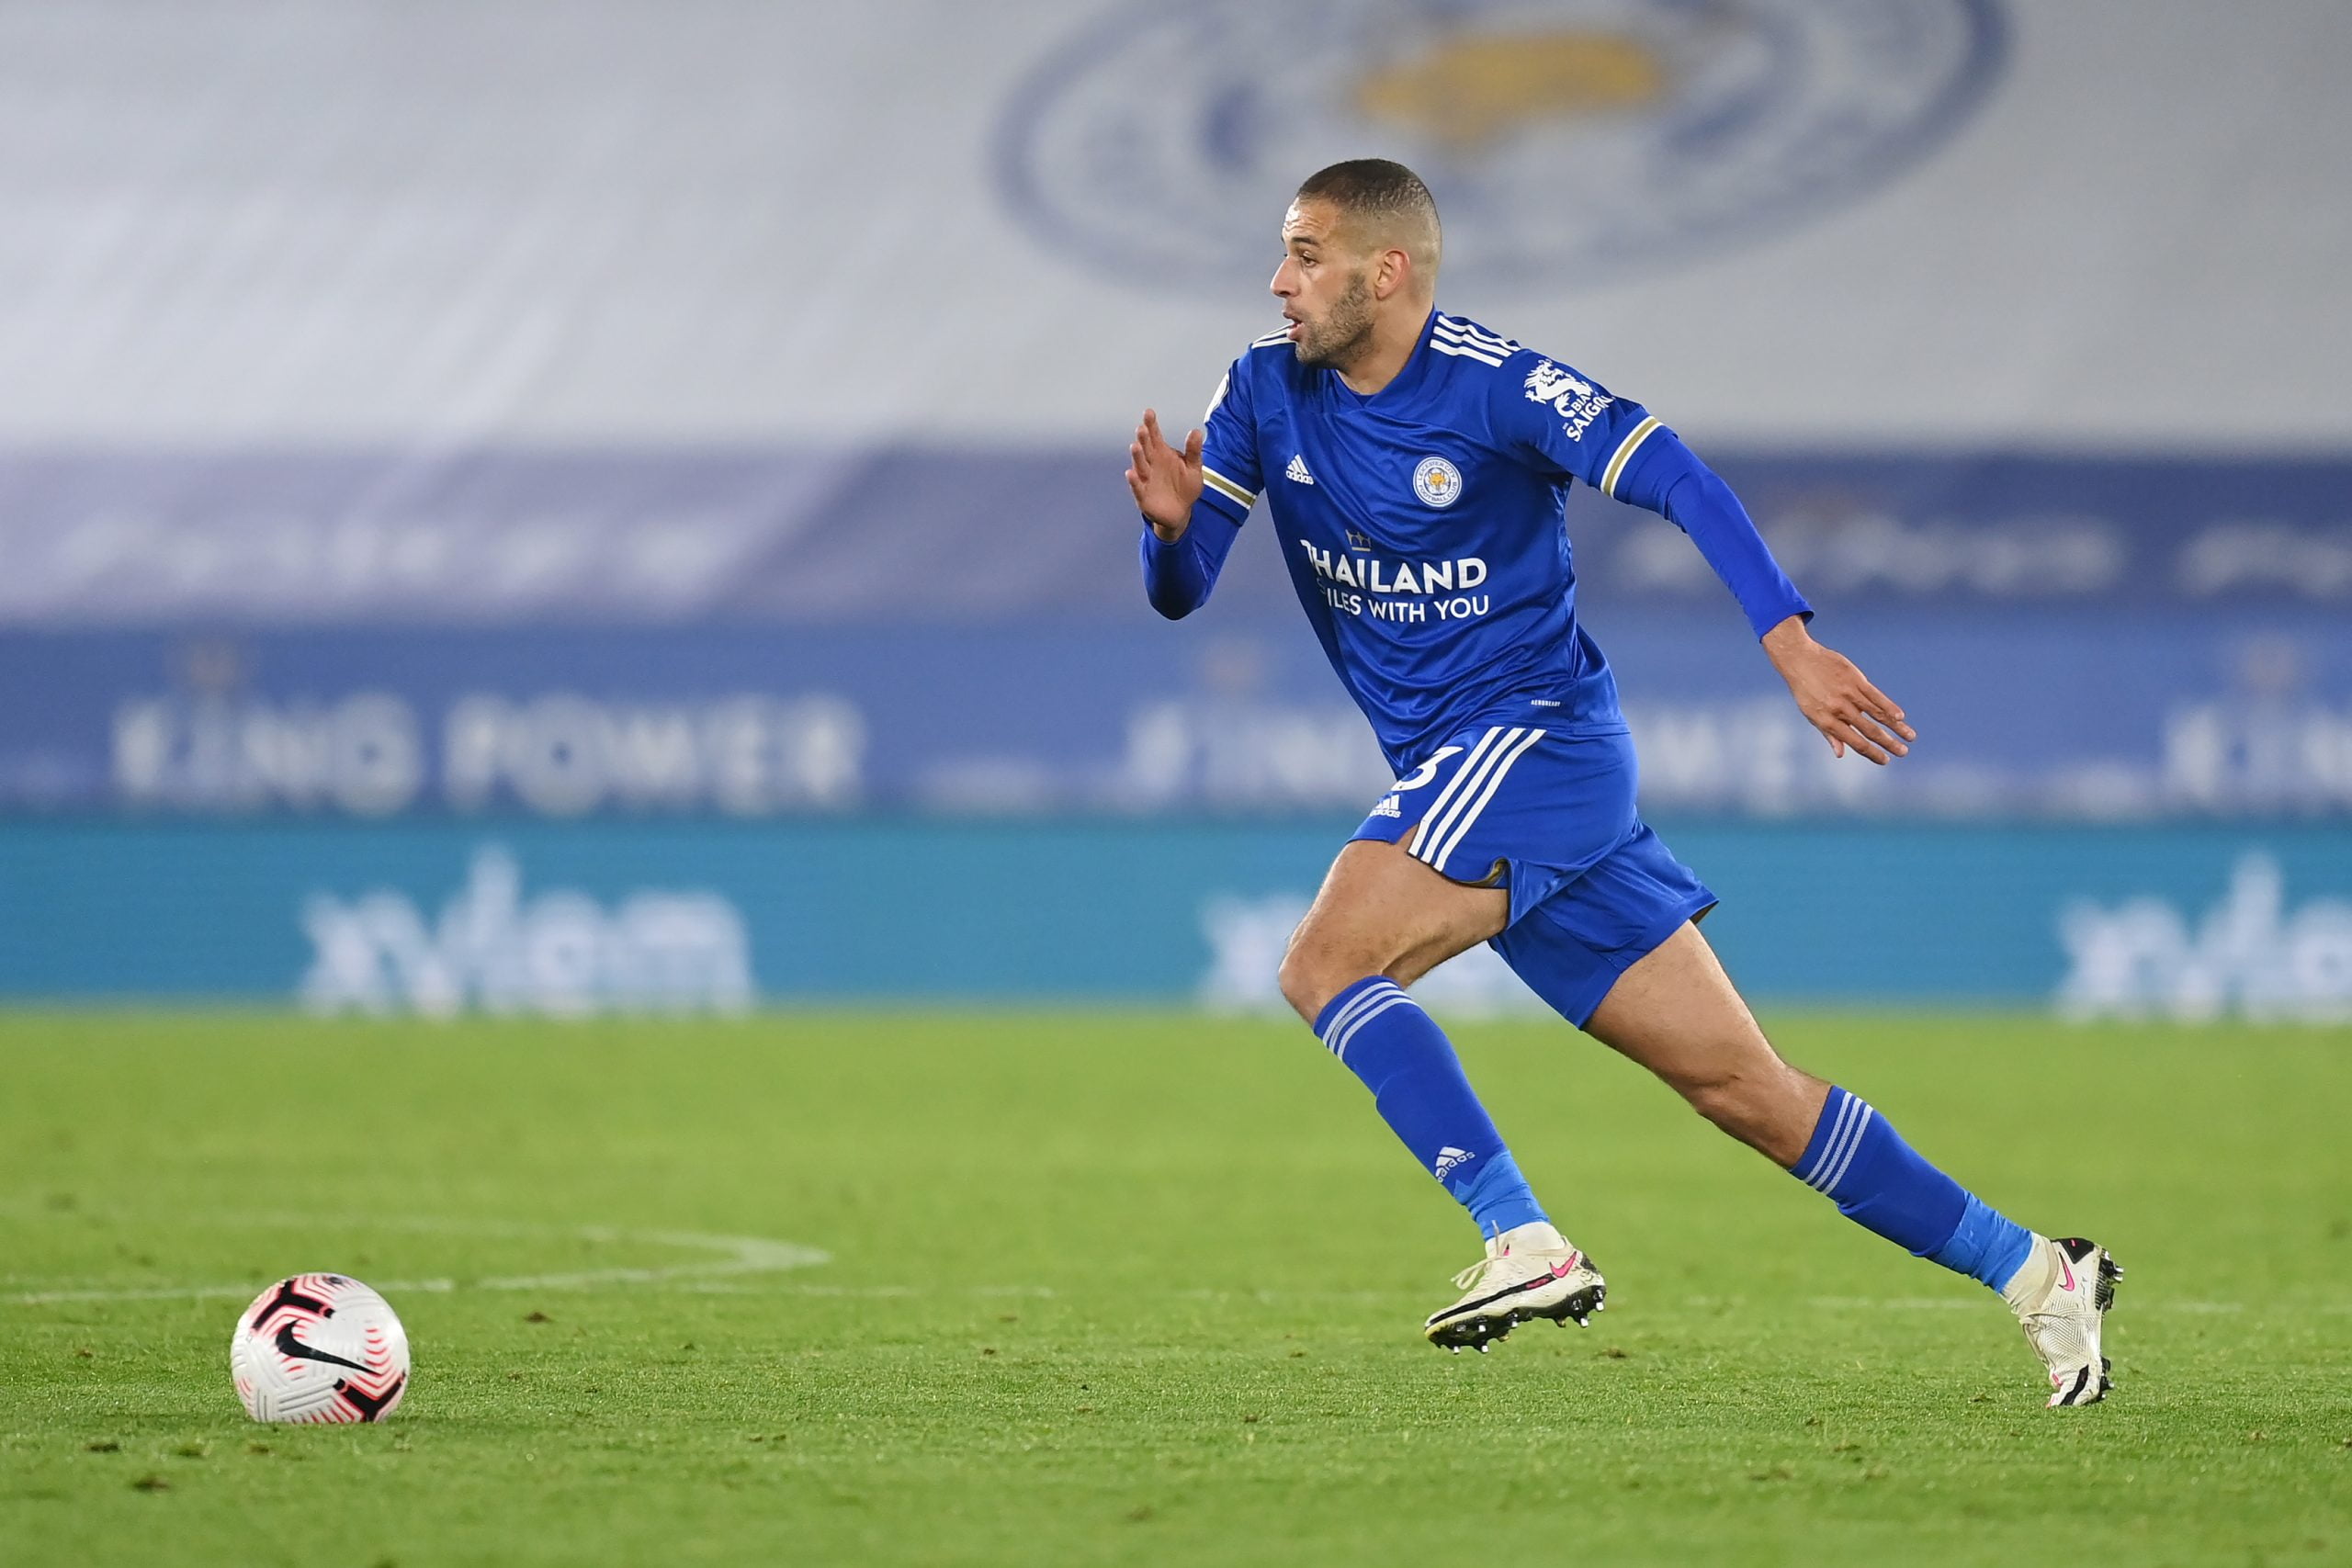 Juninho provides update on Leicester City striker Slimani's future (Slimani is in action in the picture)